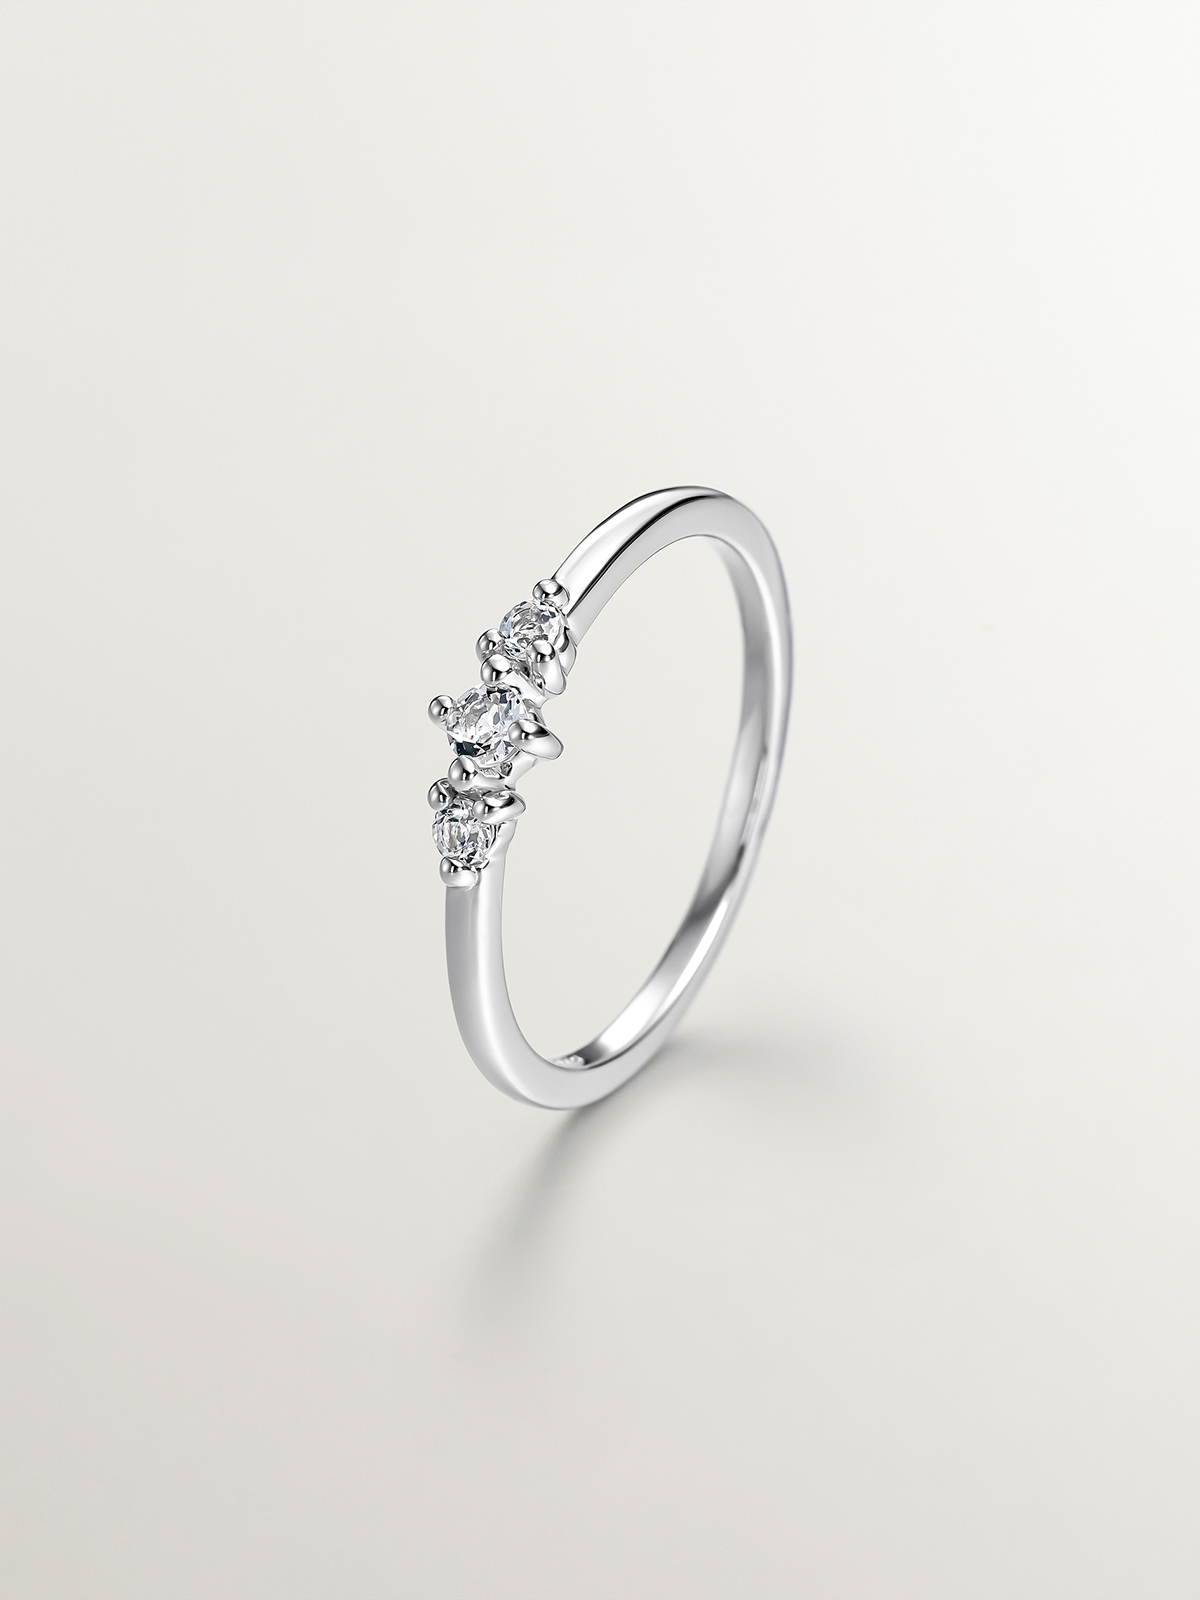 925 Silver Ring with White Topaz